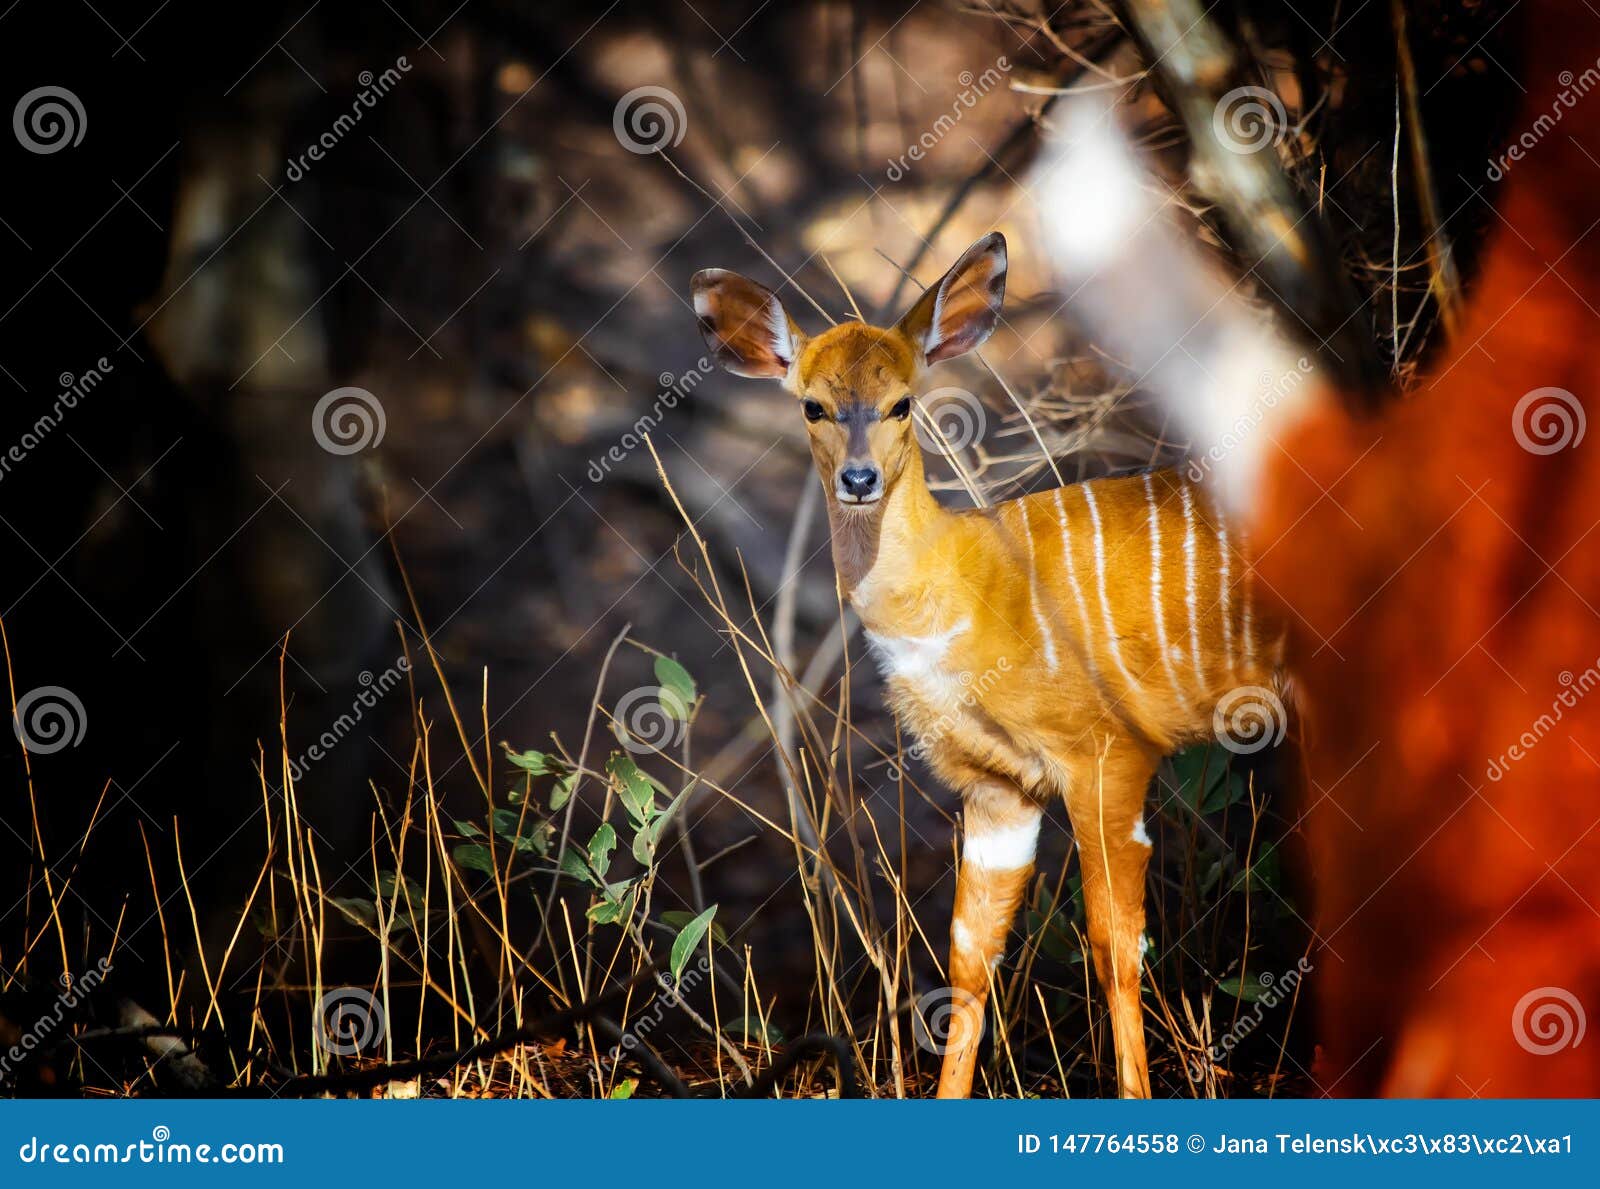 close up photo of giant eland baby, also known as the lord derby eland in the bandia reserve, senegal. it is wildilfe photo of